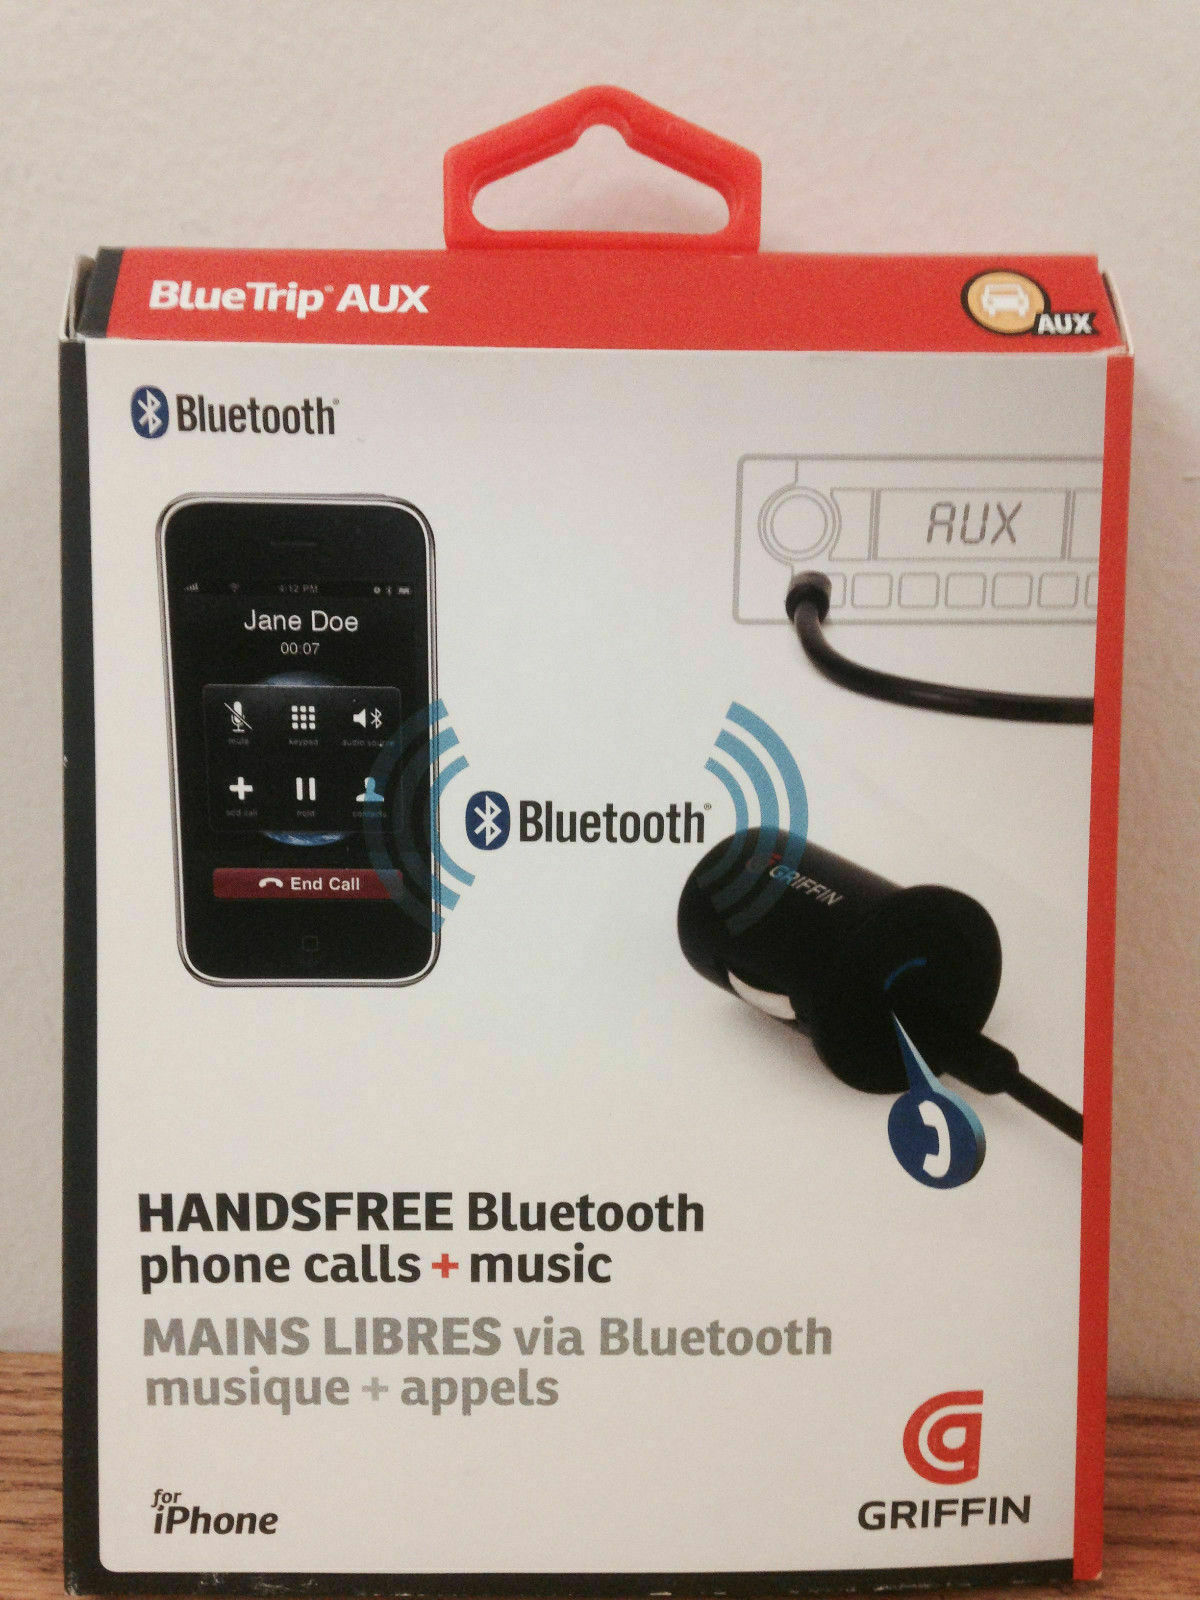 Griffin Bluetrip Aux Bluetooth Wireless Music Streaming Hands Free Calling